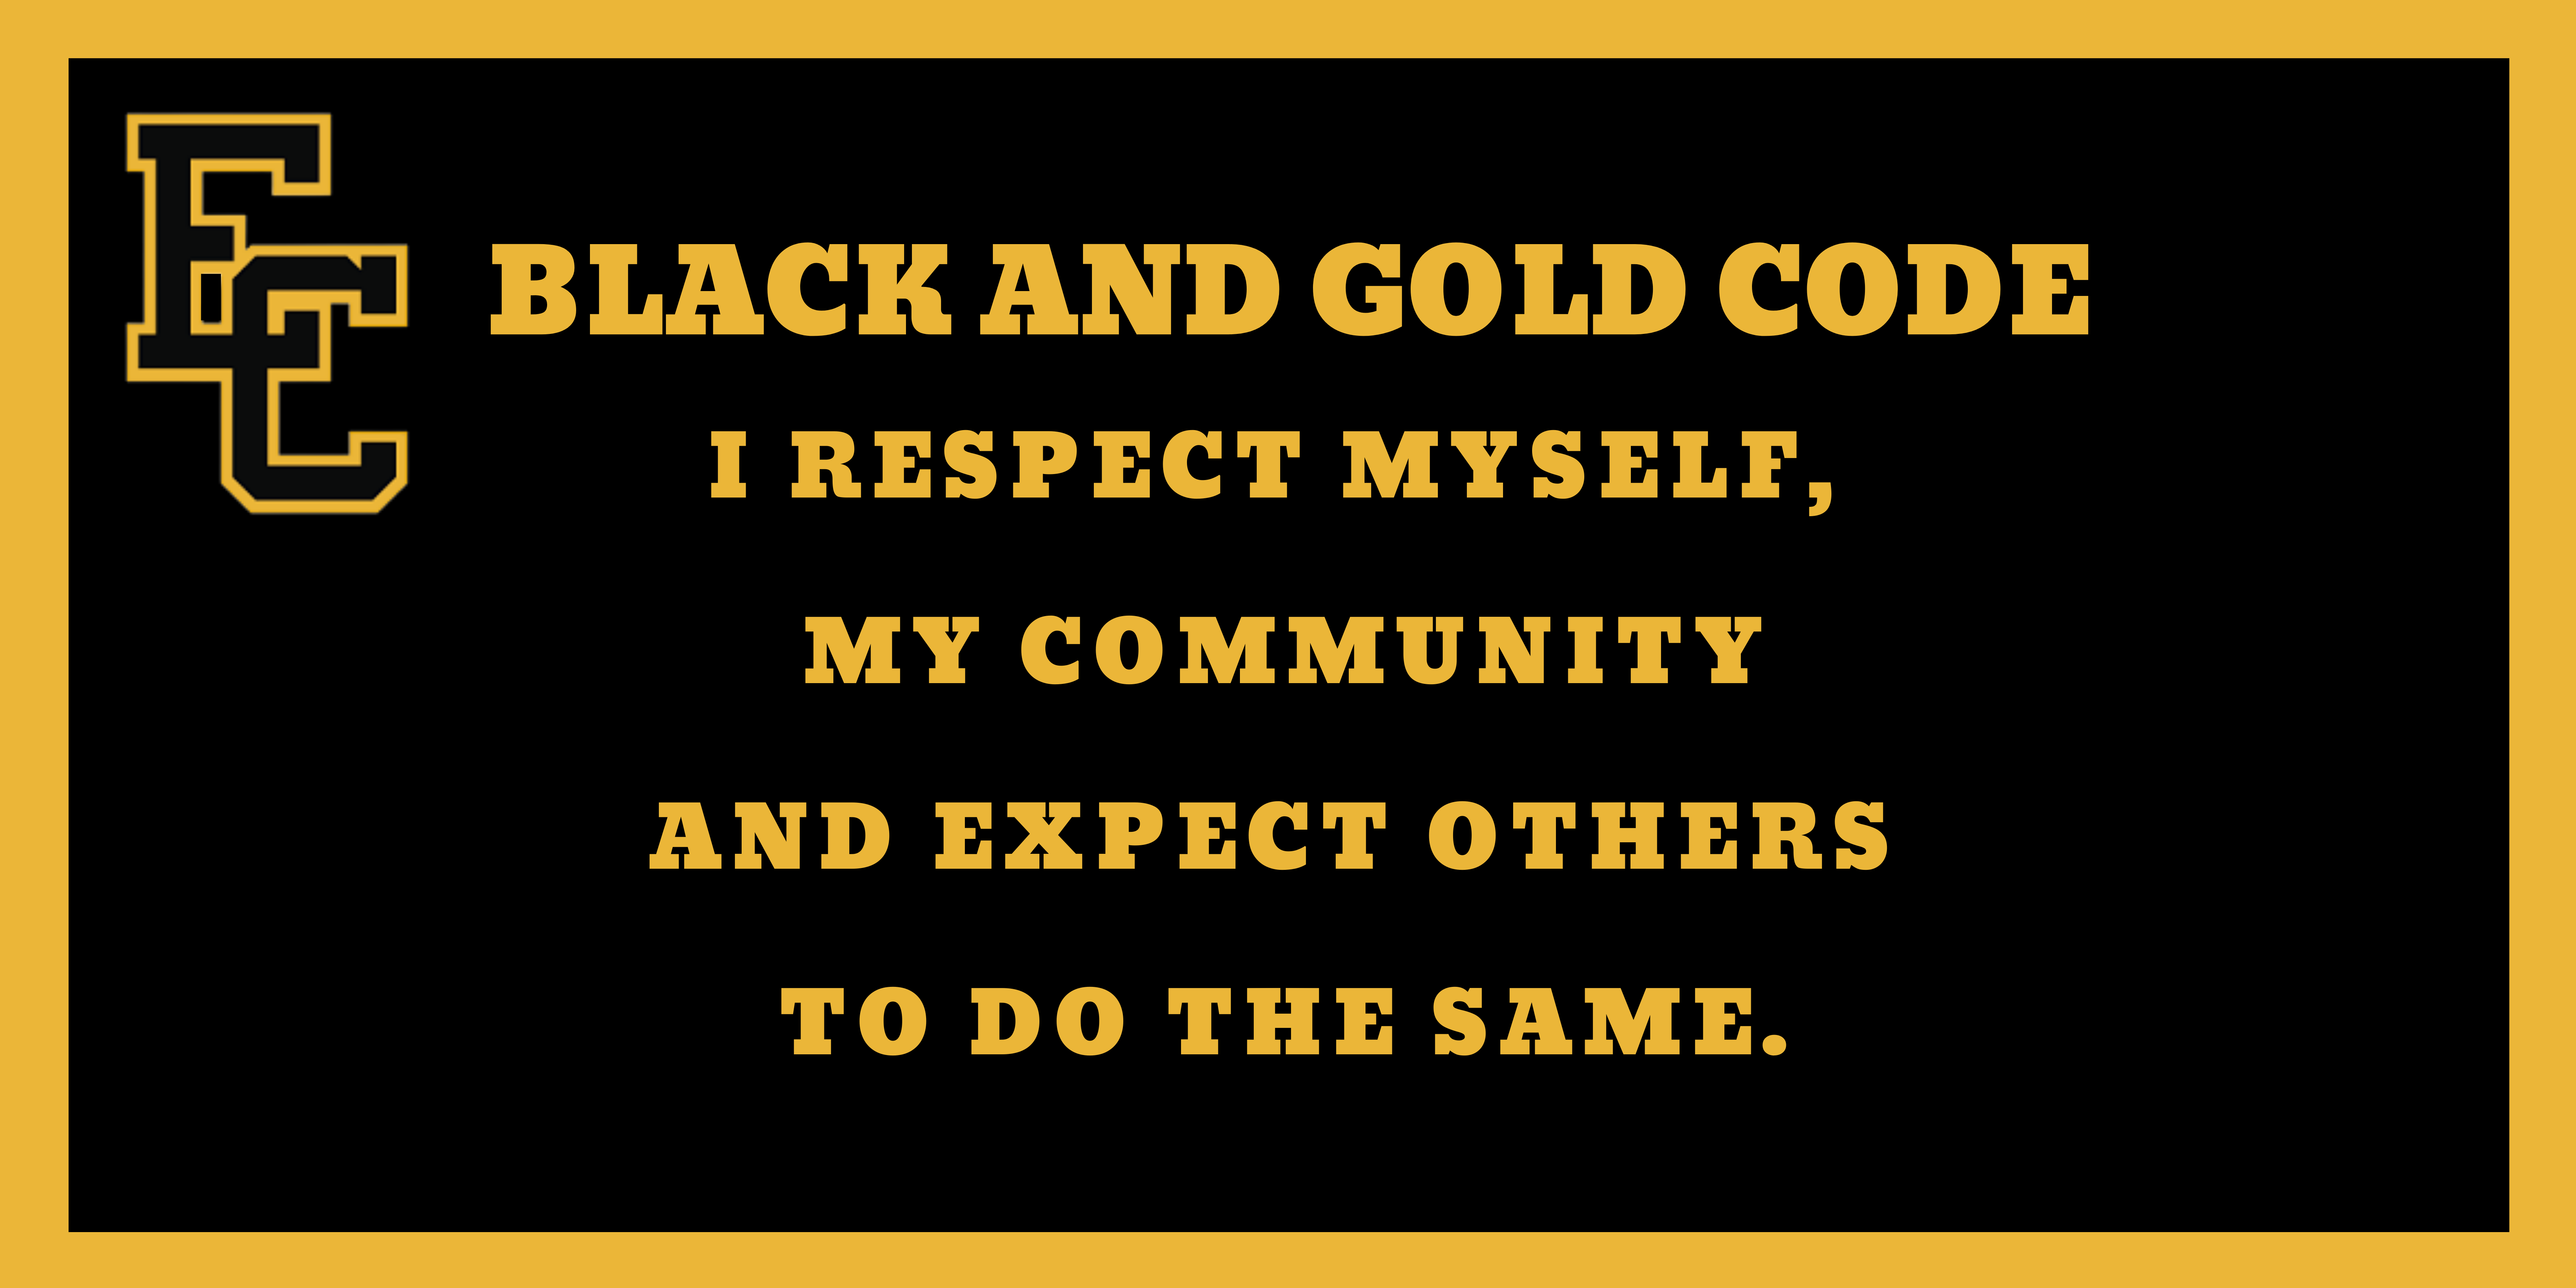 Black and gold code: I respect myself, my community, and expect others to do the same.